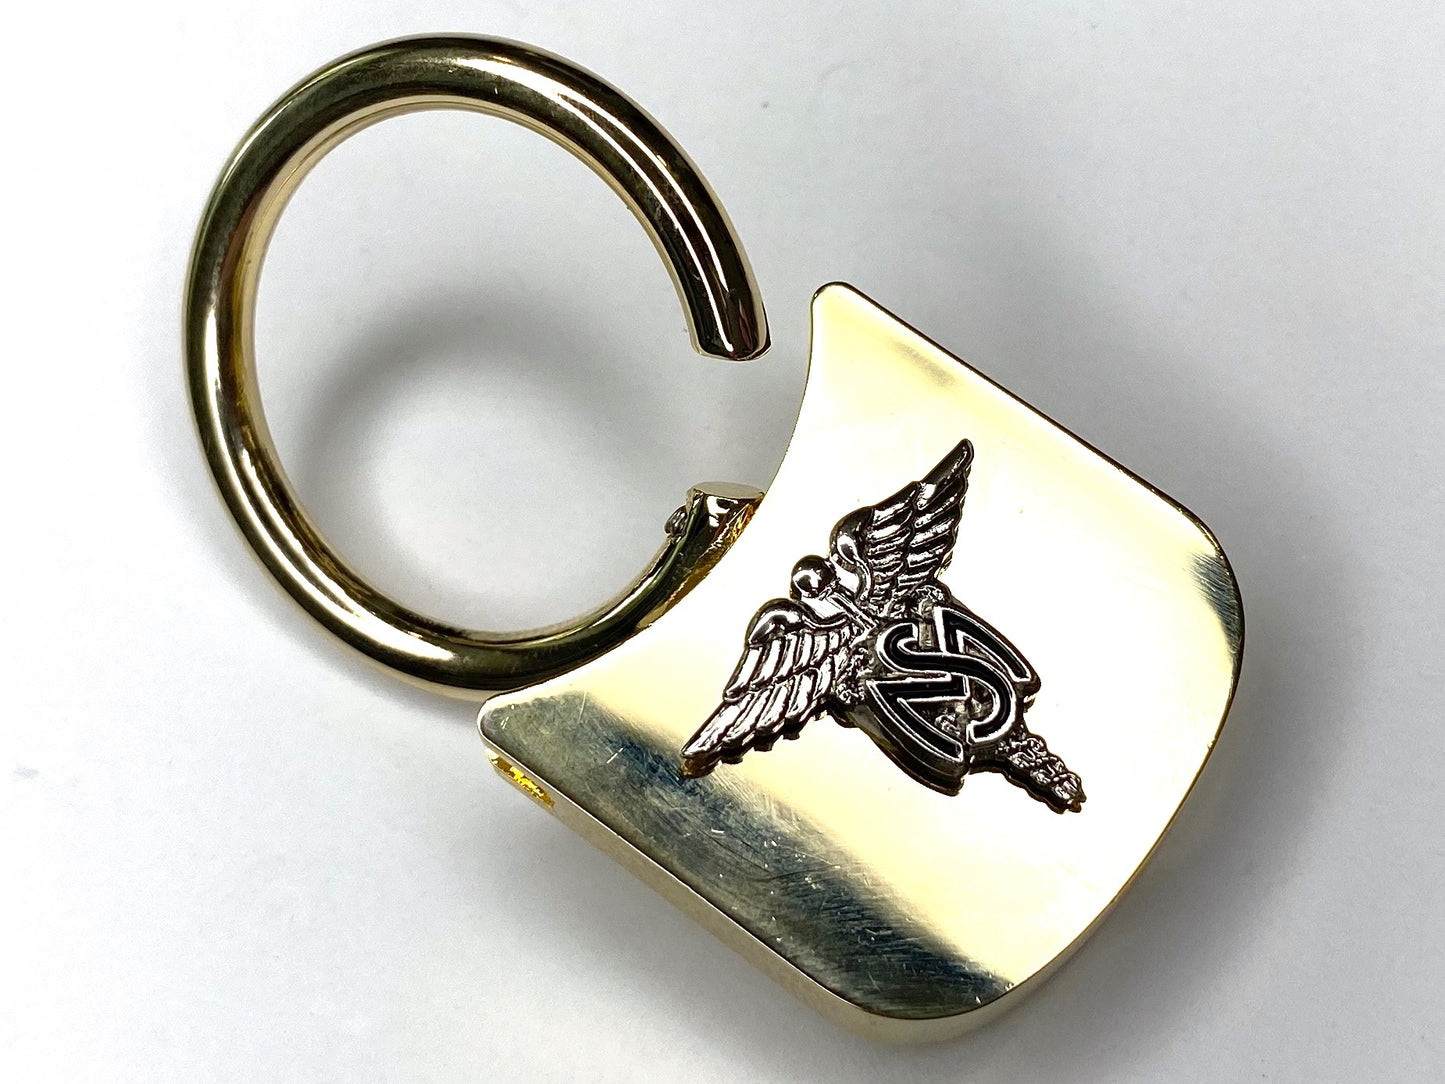 Medical Service Corps Keychain